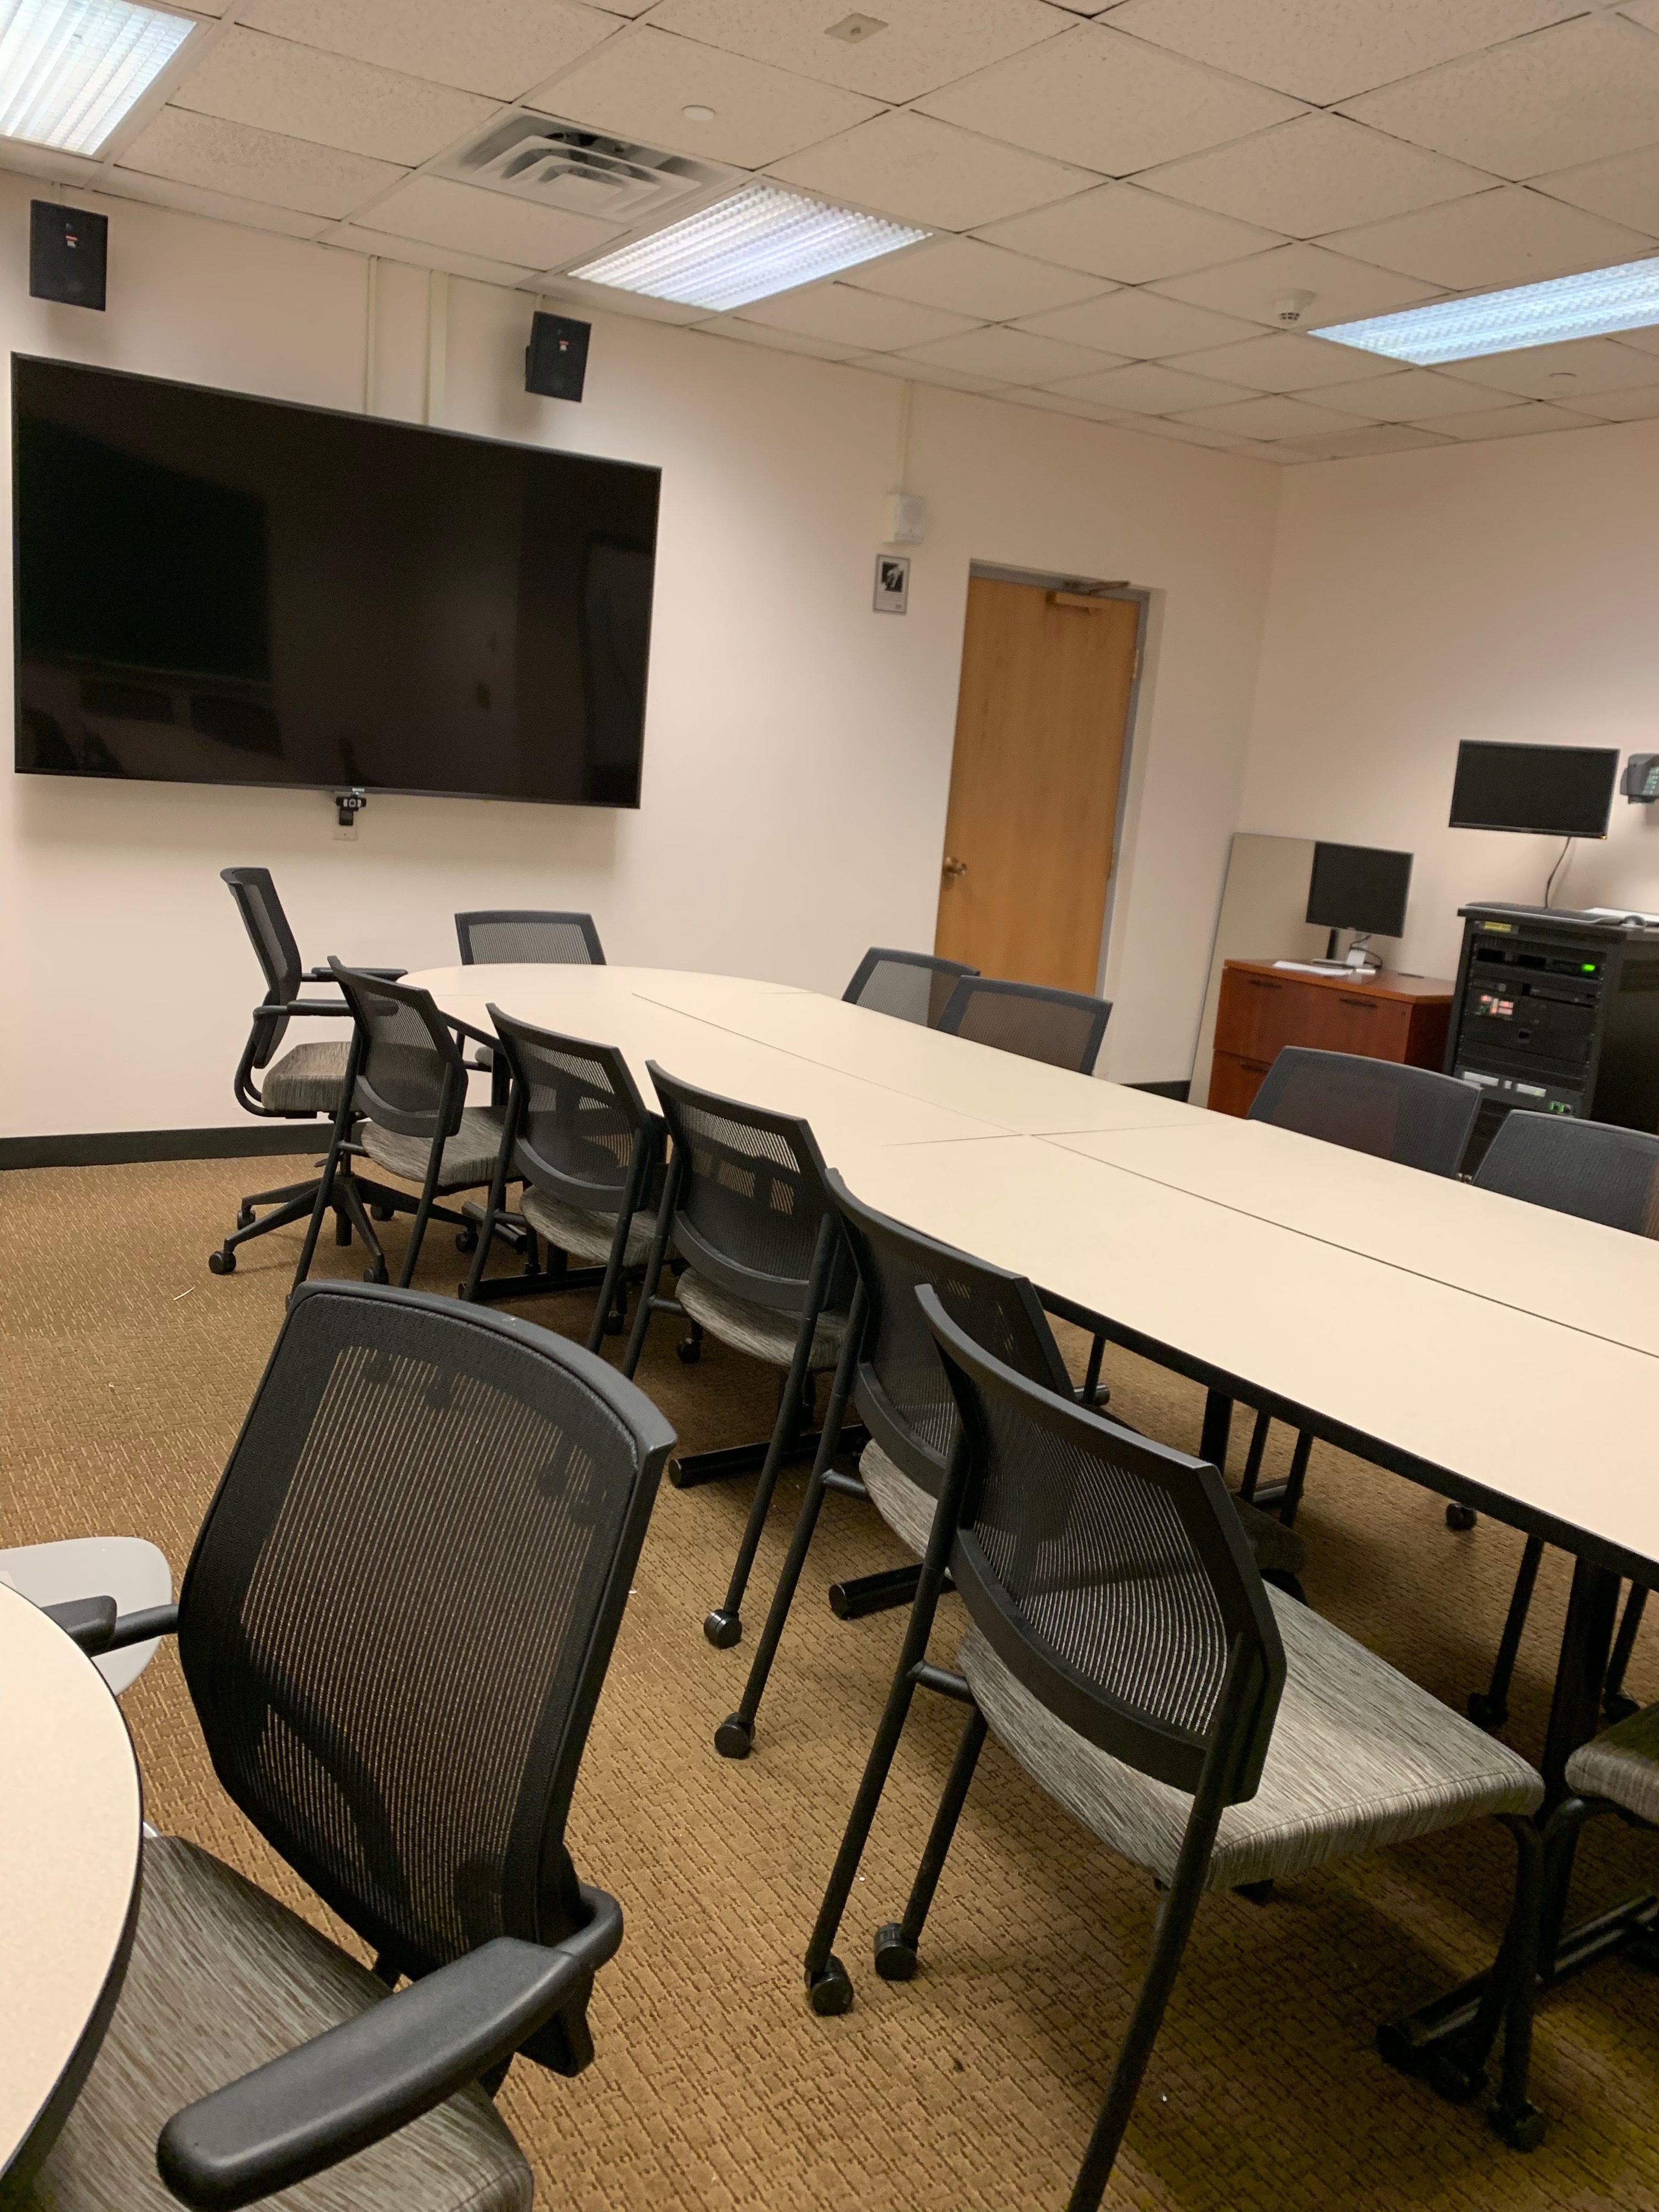 Image of 306A table, chairs, and teaching screen